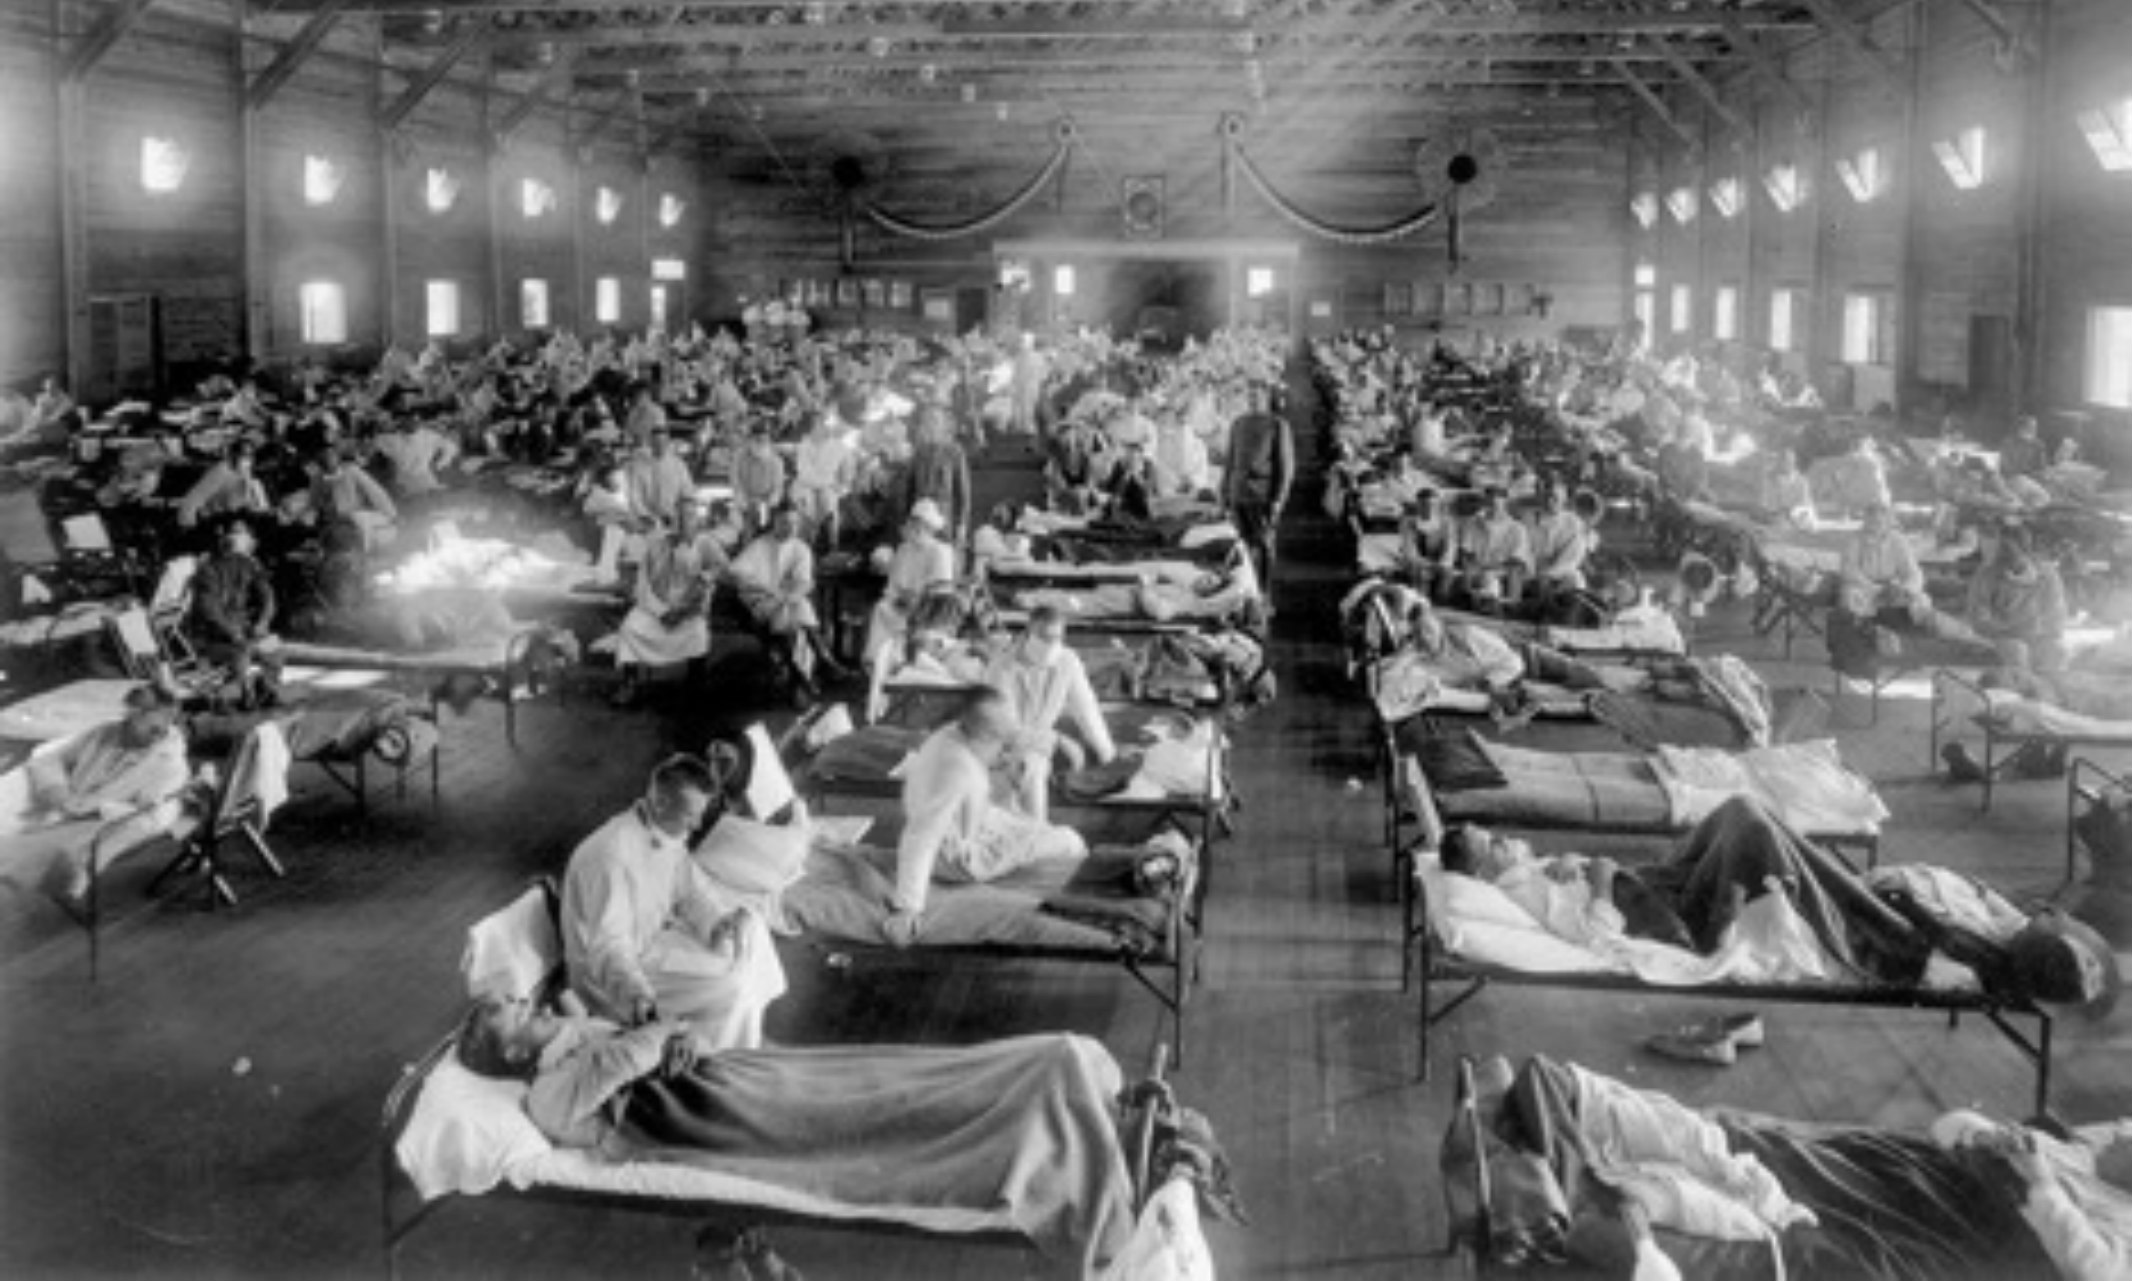 soldiers being treated for flu at Ft. Riley in 1918